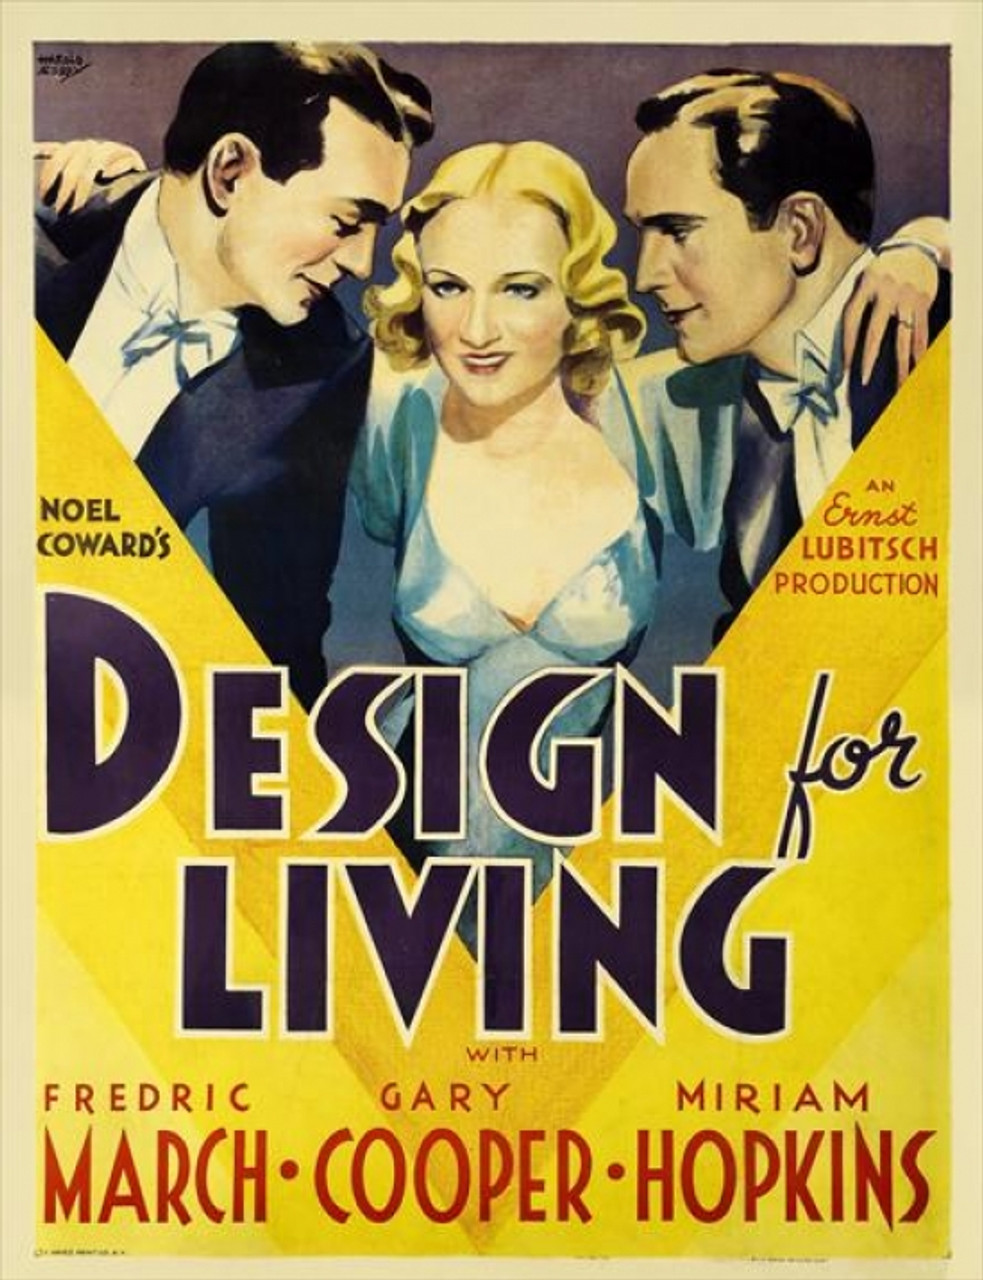 Movie poster for movie Design for Living. Three people (one man on left and one on right with women in the center). Design for Living is in the center. At the bottom is Fredric March, Gary Cooper, and Miriam Hopkins in red font. 